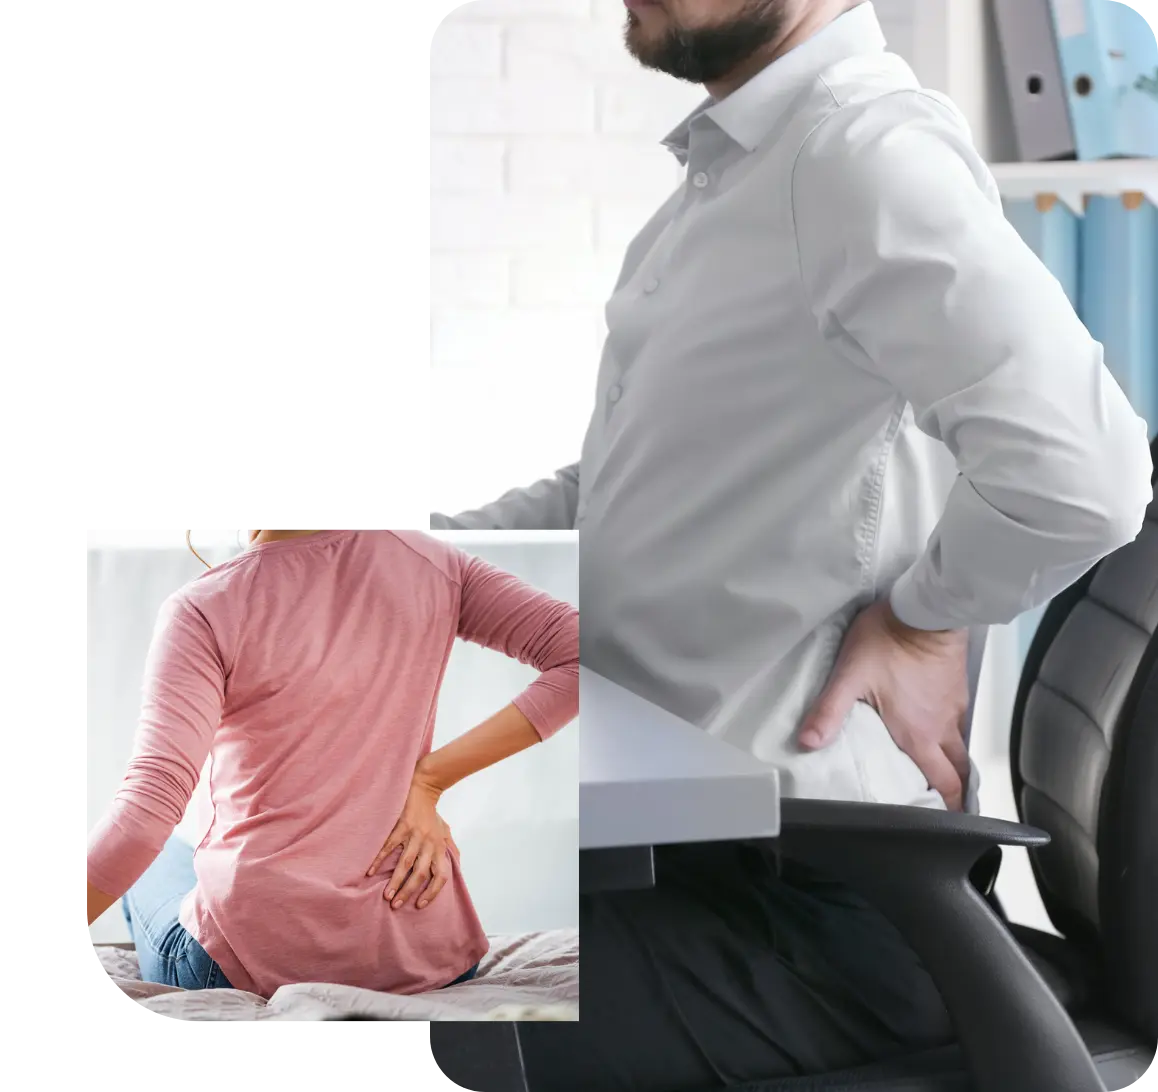 Chiropractic Care Lower Back Pain | Peak Potential Family Chiropractor